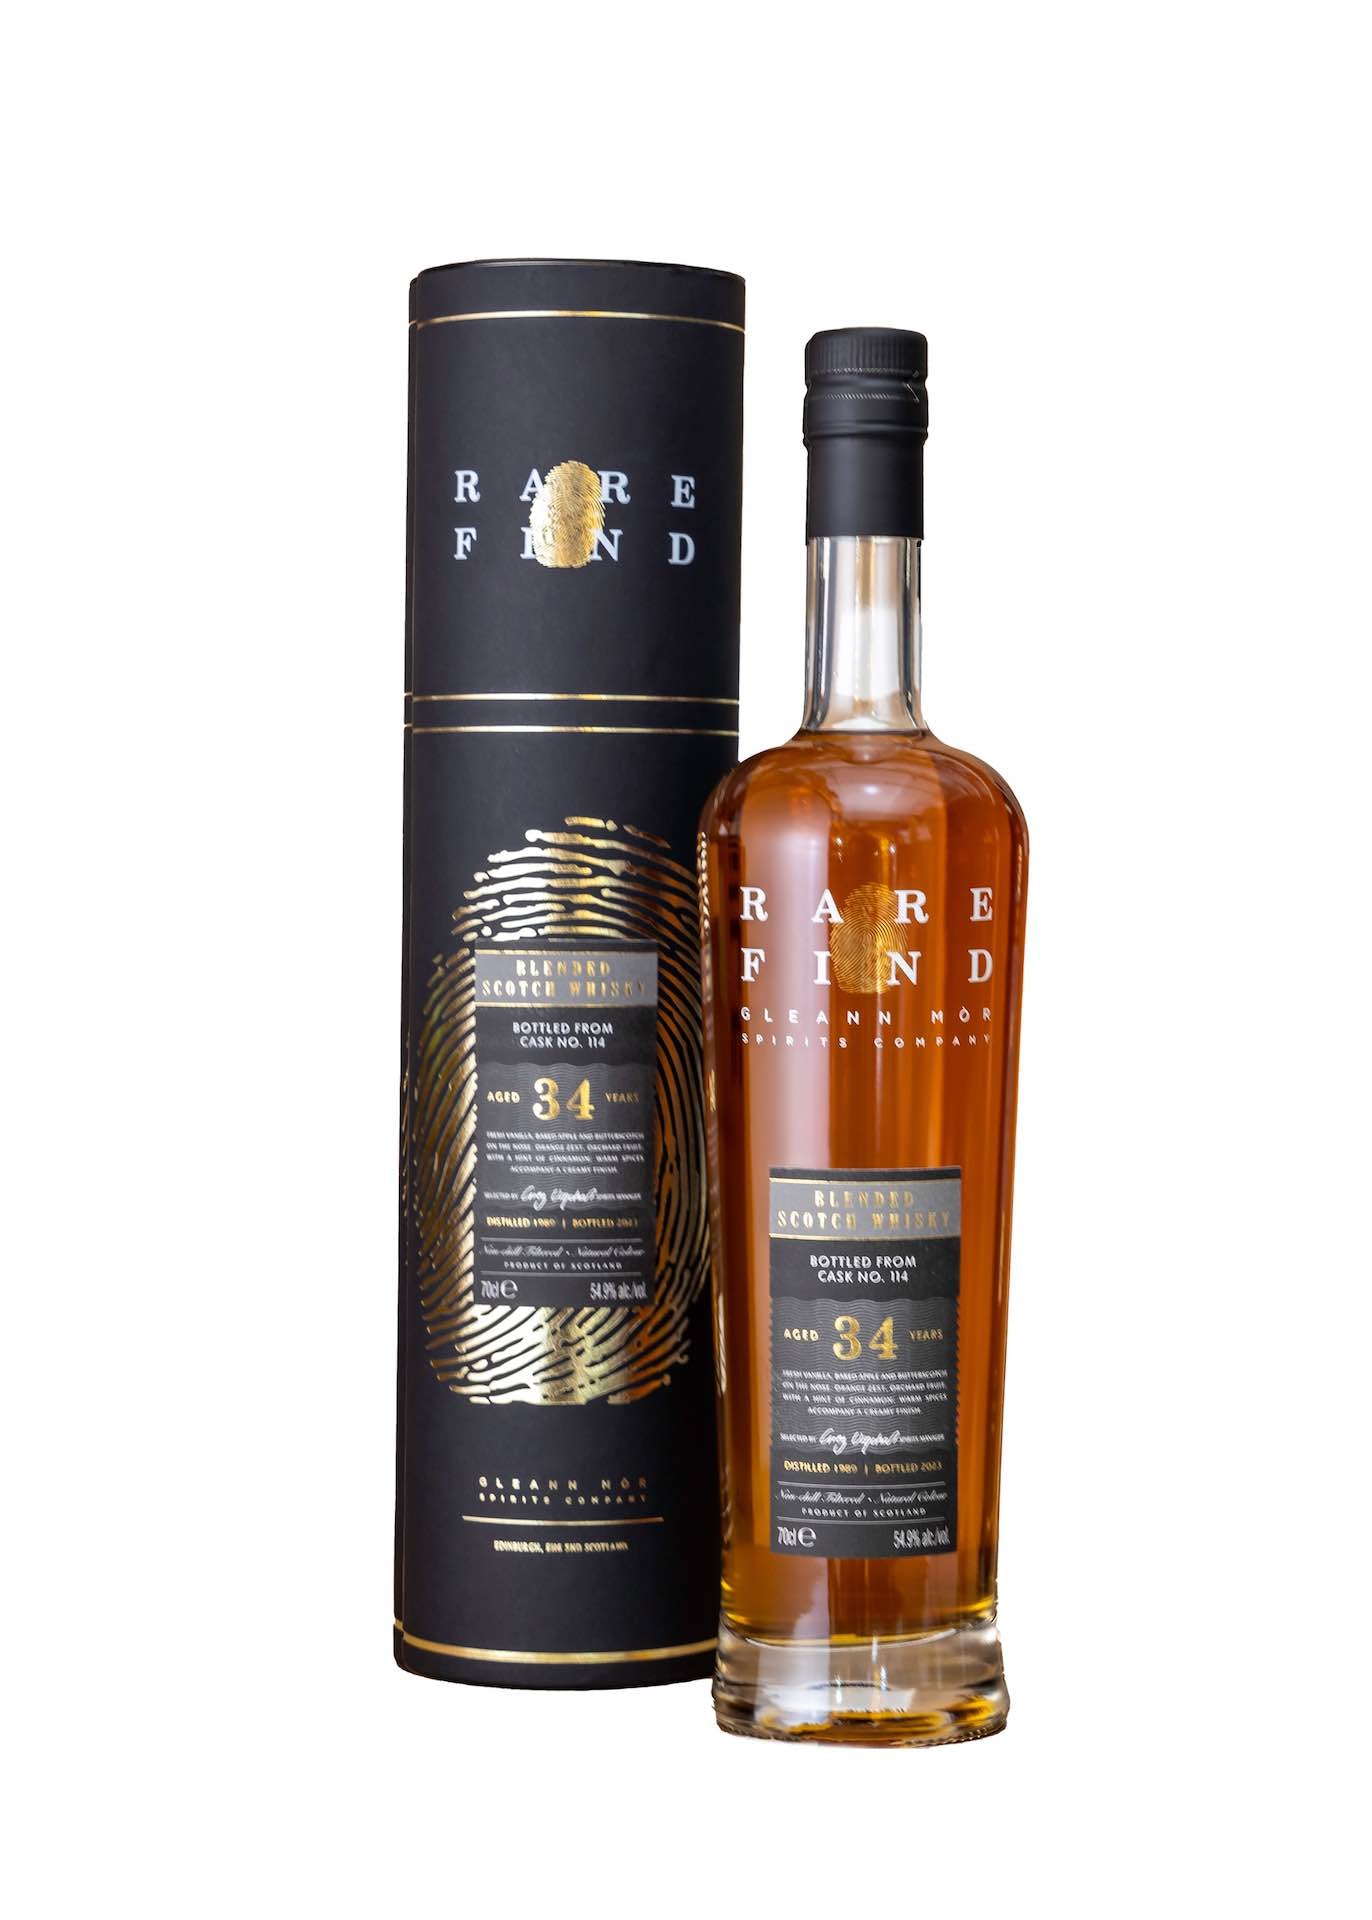 Gleann Mor Rare Find Blended Scotch 34 Year Old